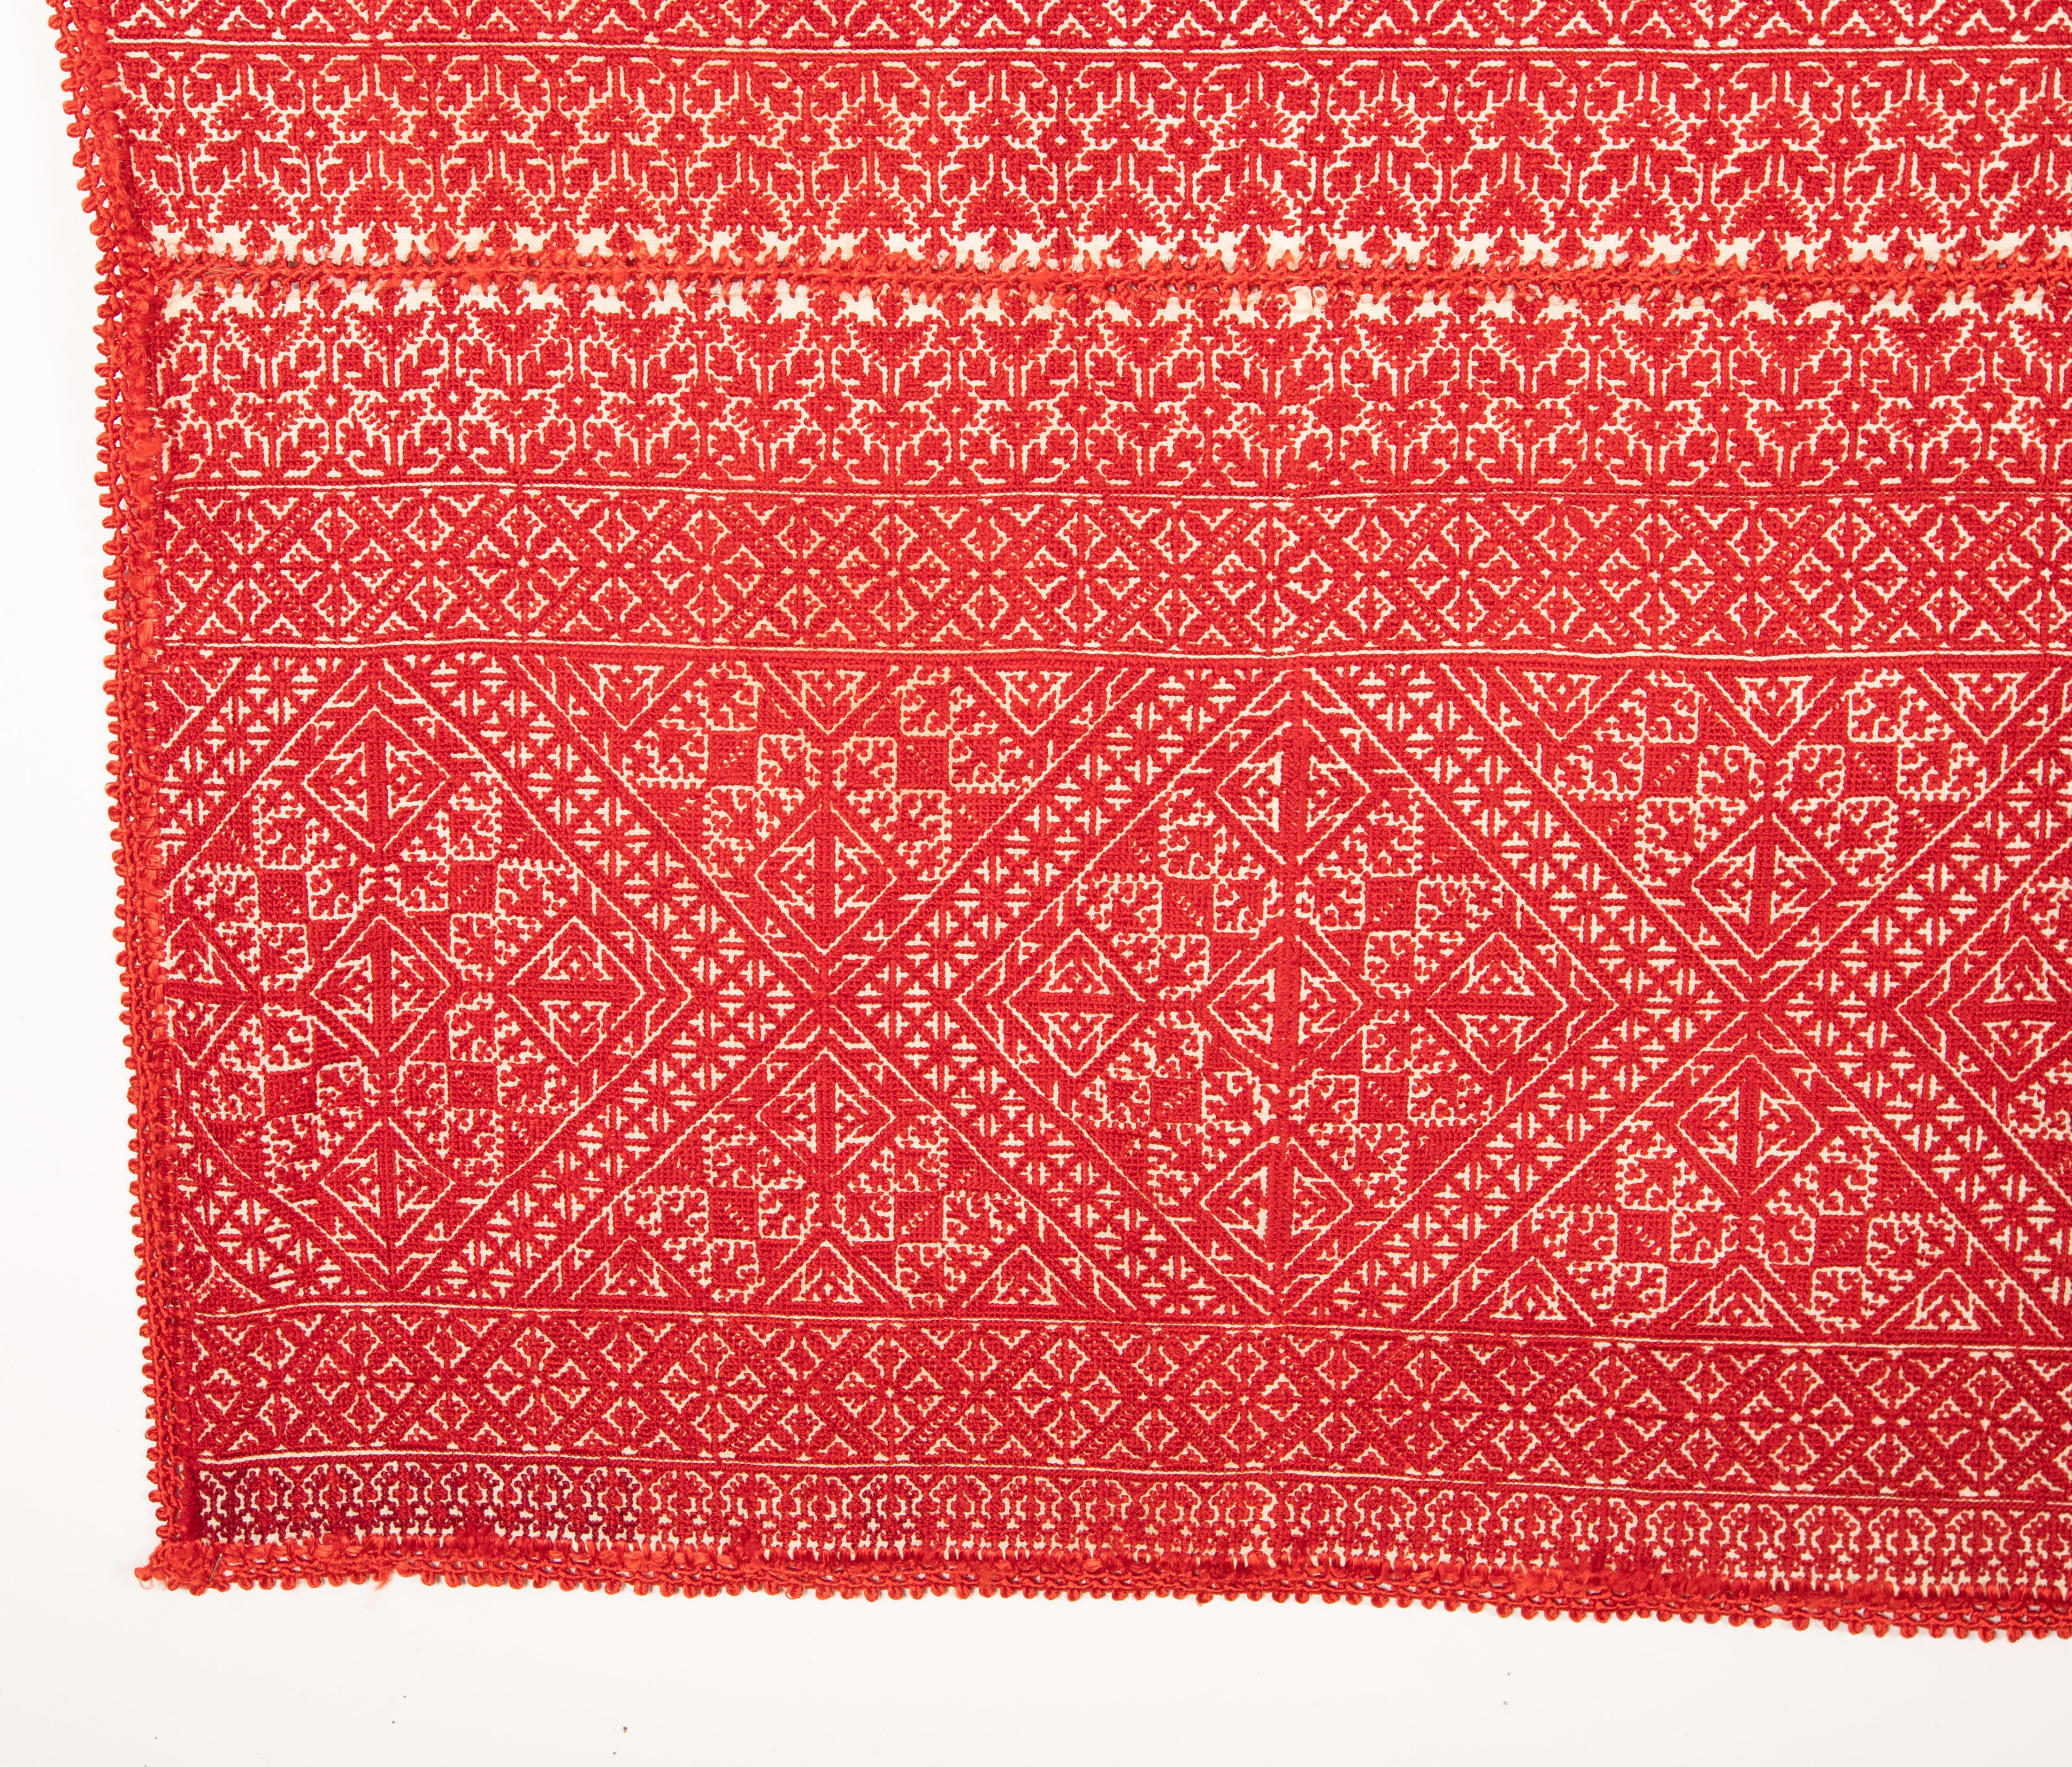 Moroccan Antique Fez Embroidery from Morocco, 1900s